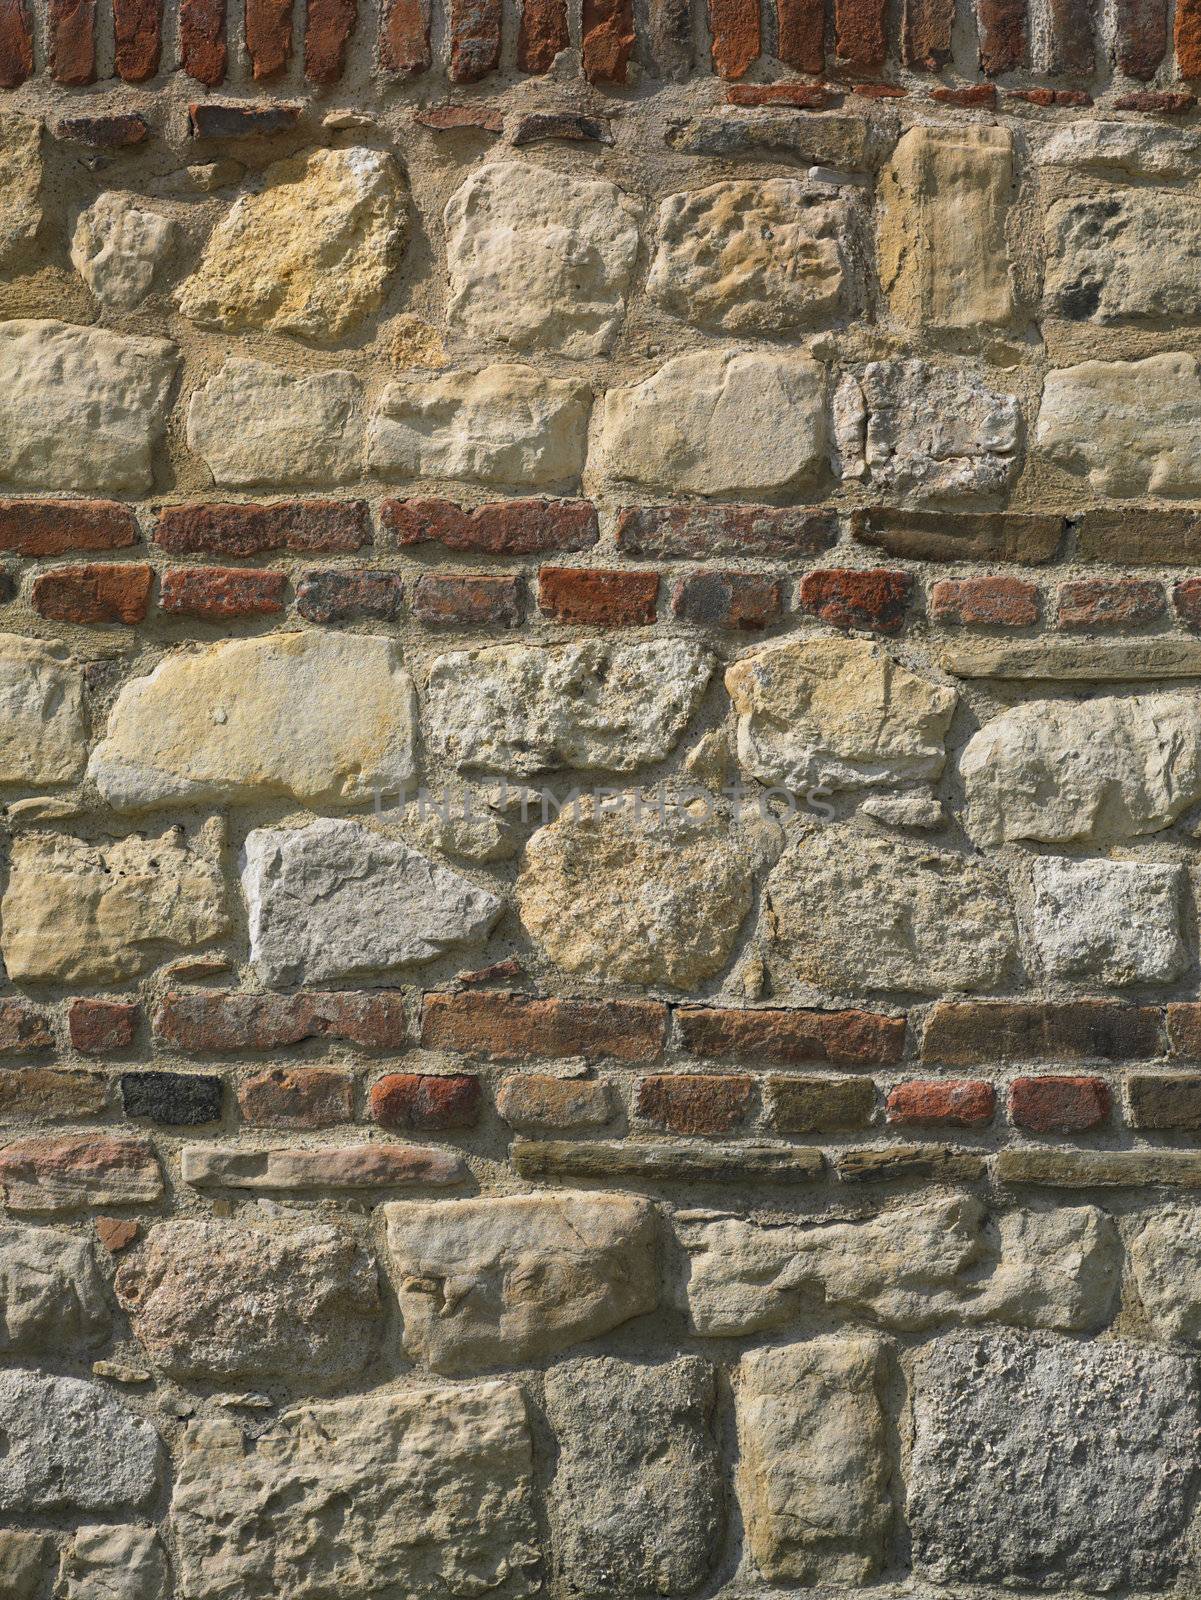 Wall of bricks and rocks, wide and detail